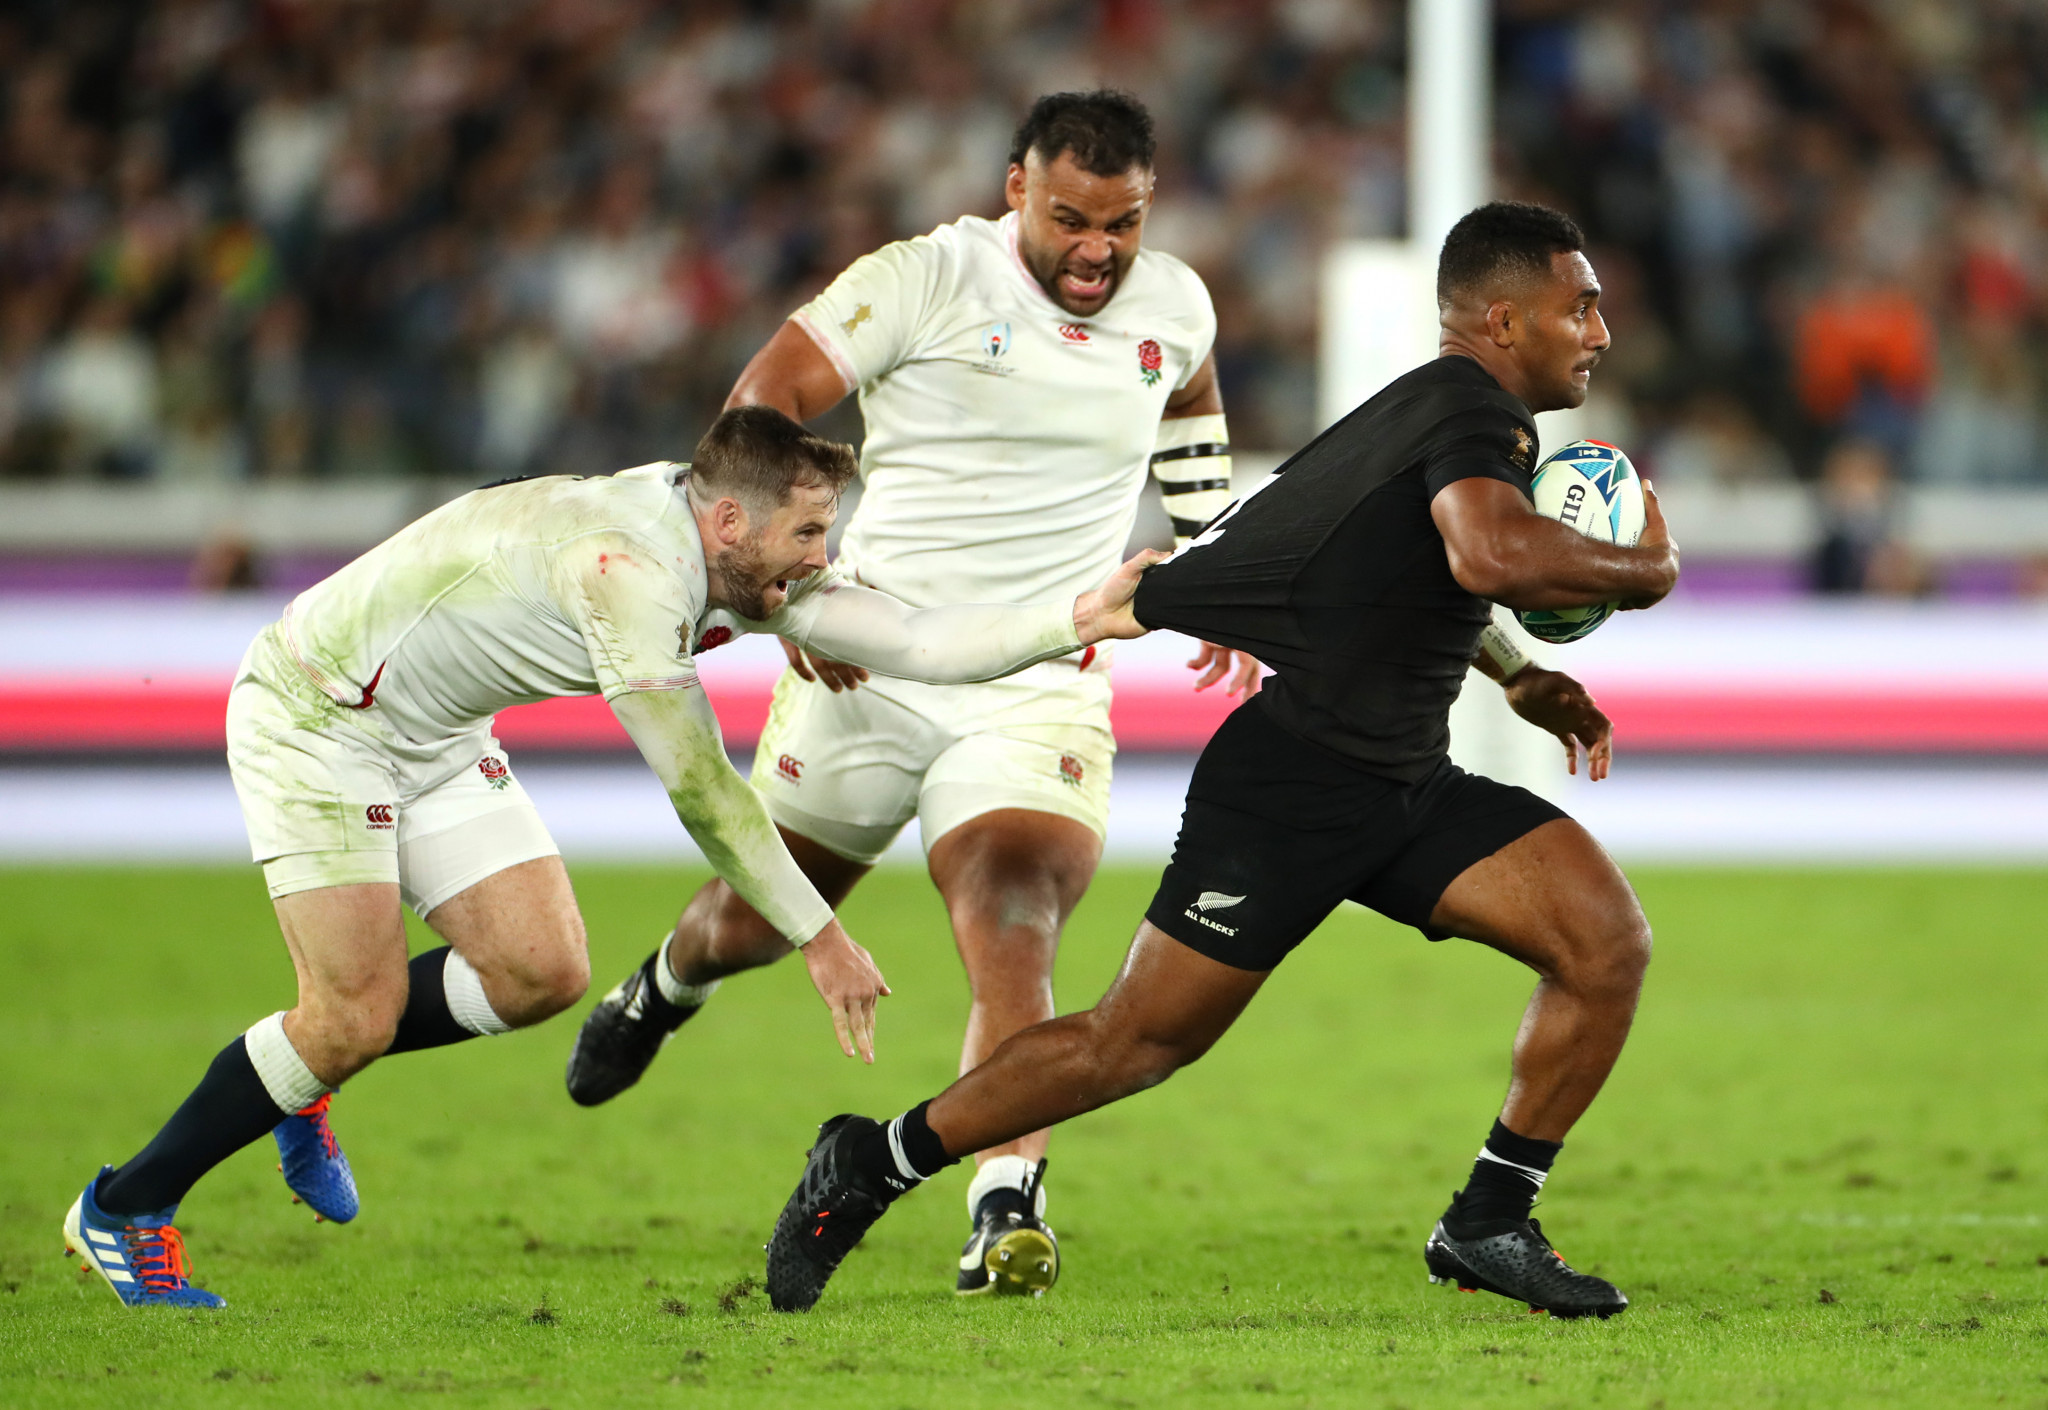 England refused to let go of New Zealand ©Getty Images